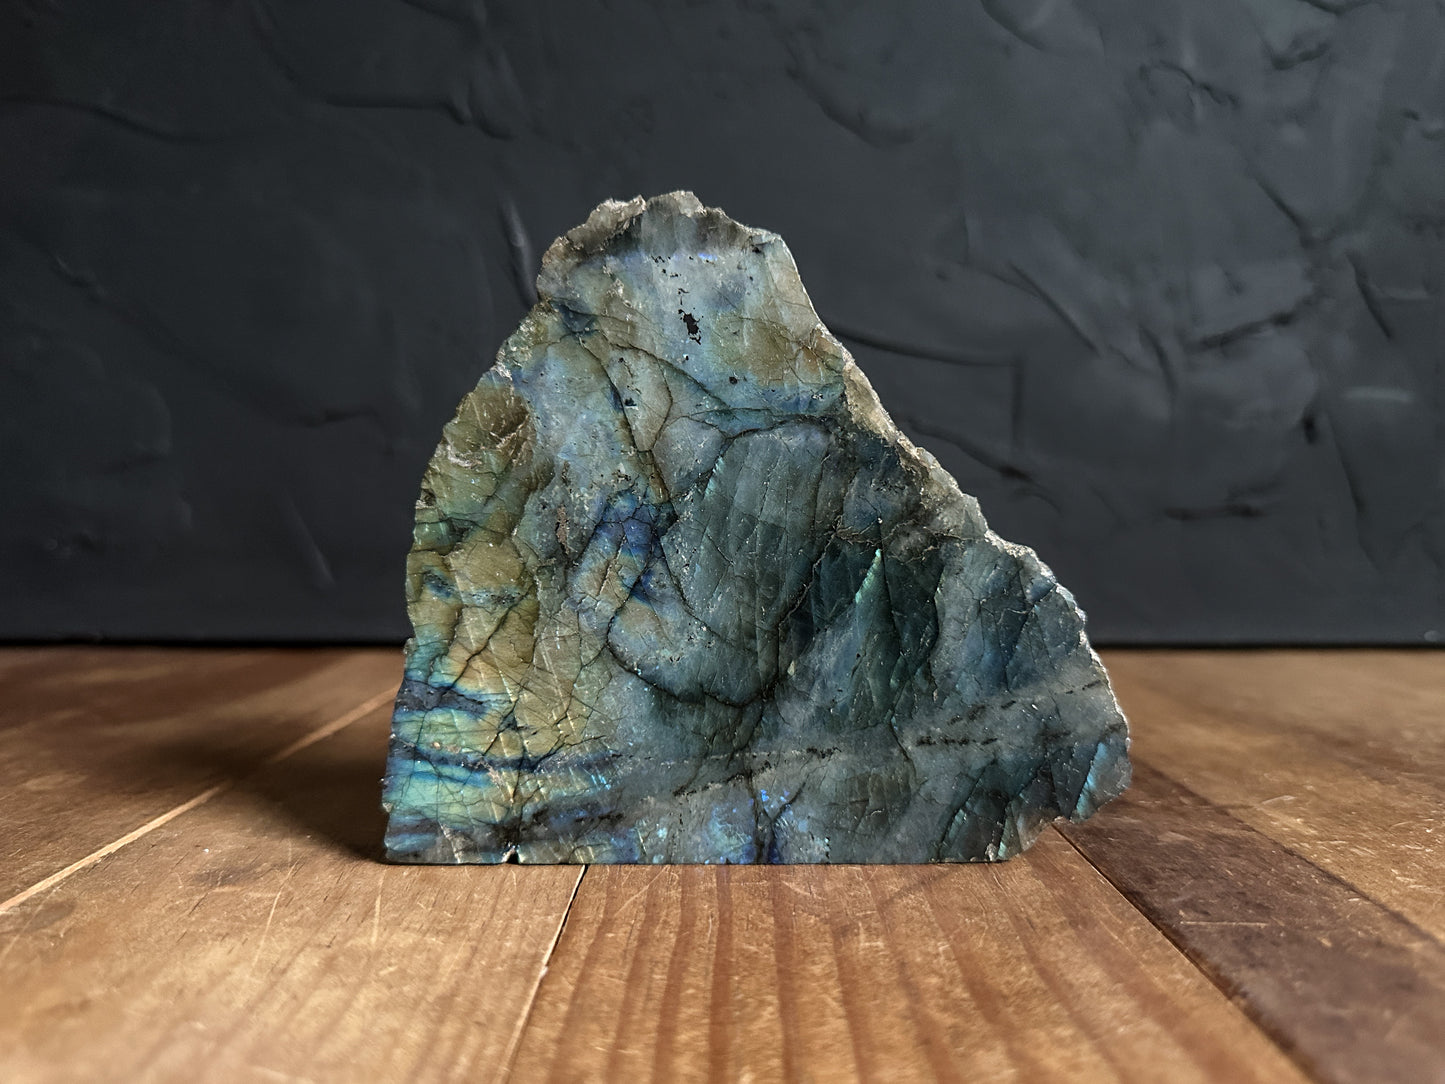 Flashy Labradorite Slab. The flashes on the face range from golden yellows to electric blues! On the back has many different shades of blue!